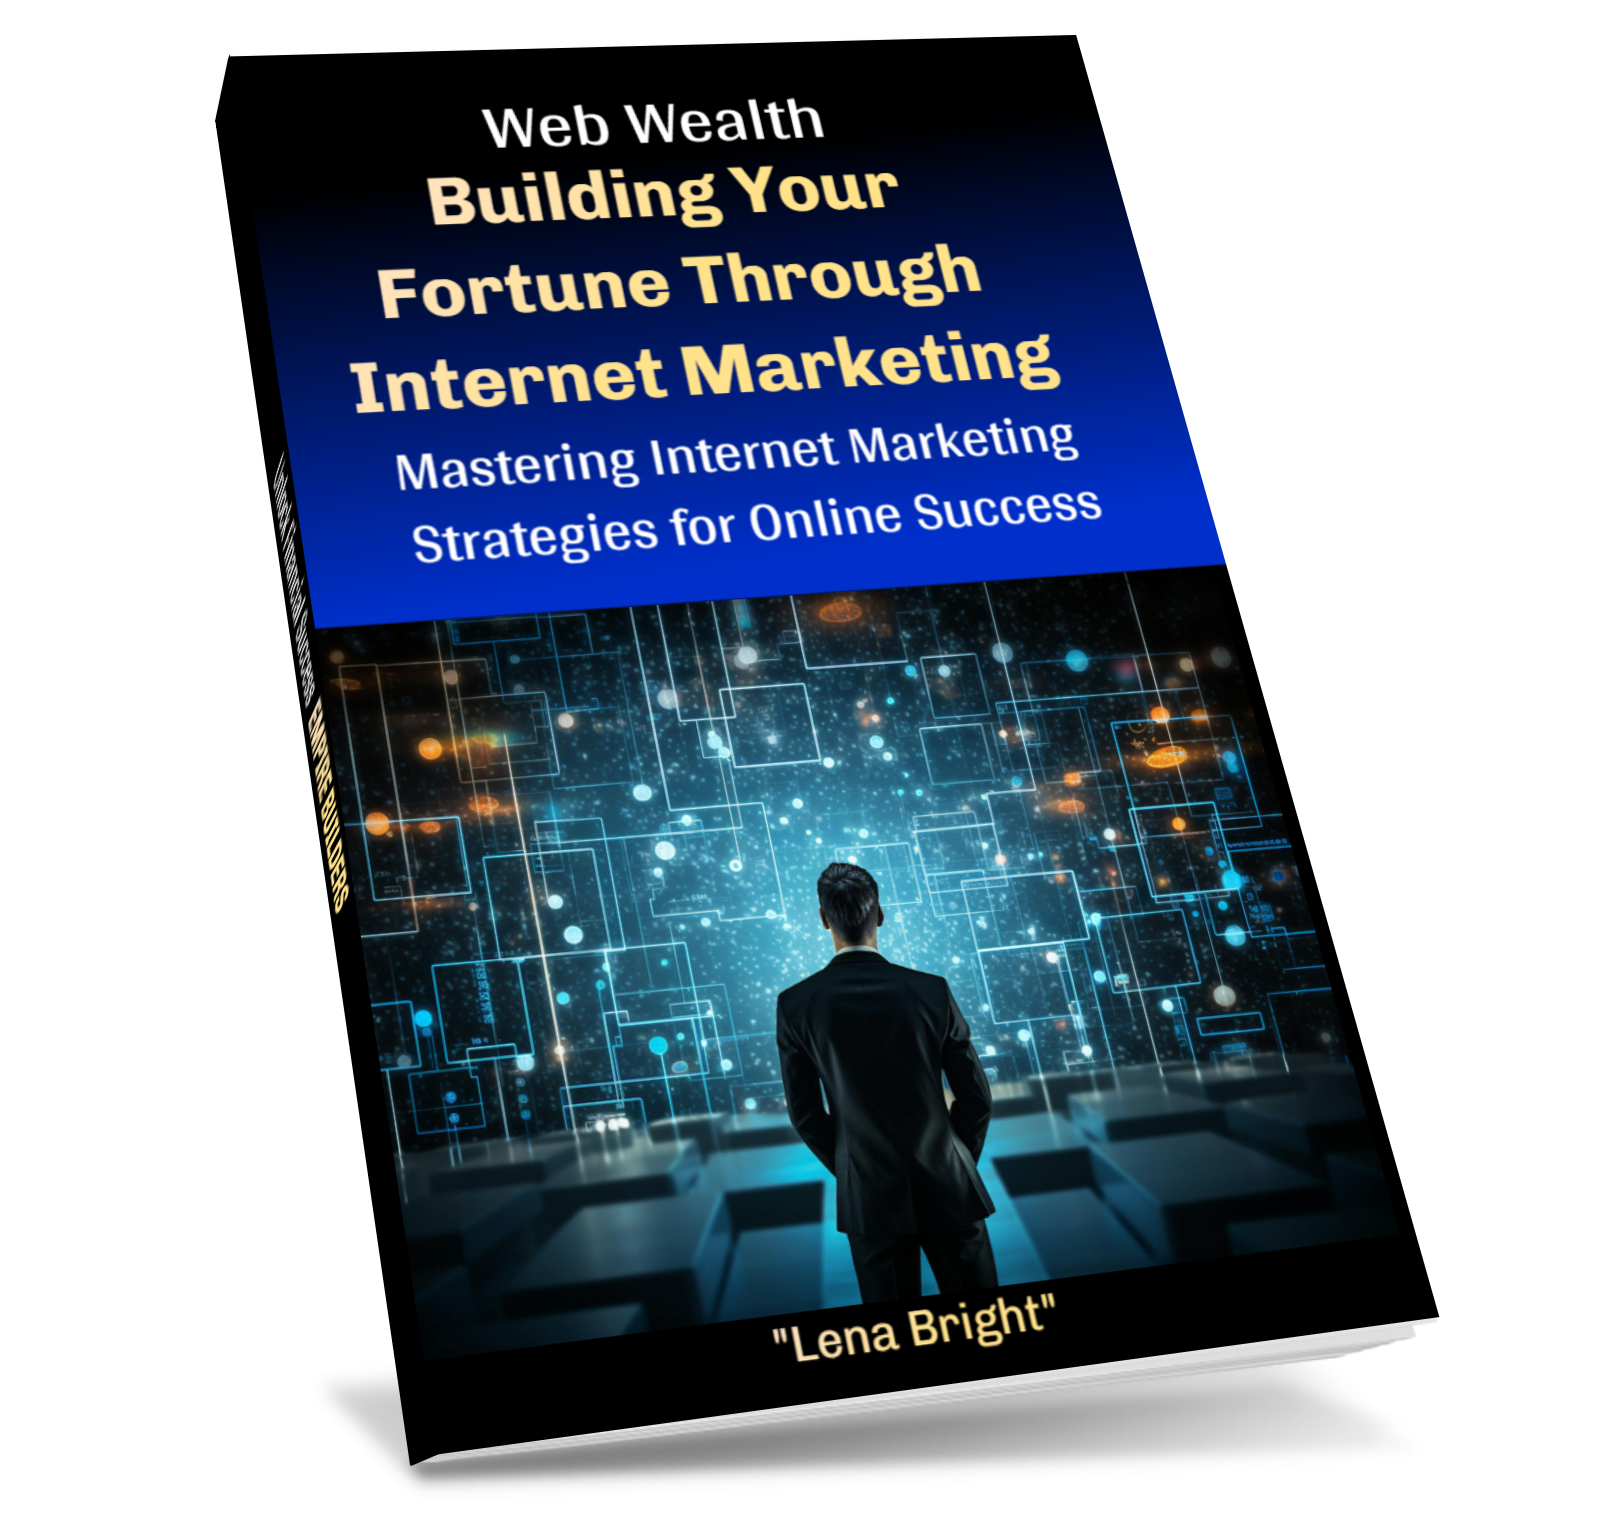 6633a5194ce62_Web_Wealth__Building_Your_Fortune_Through_Internet_Marketing.png